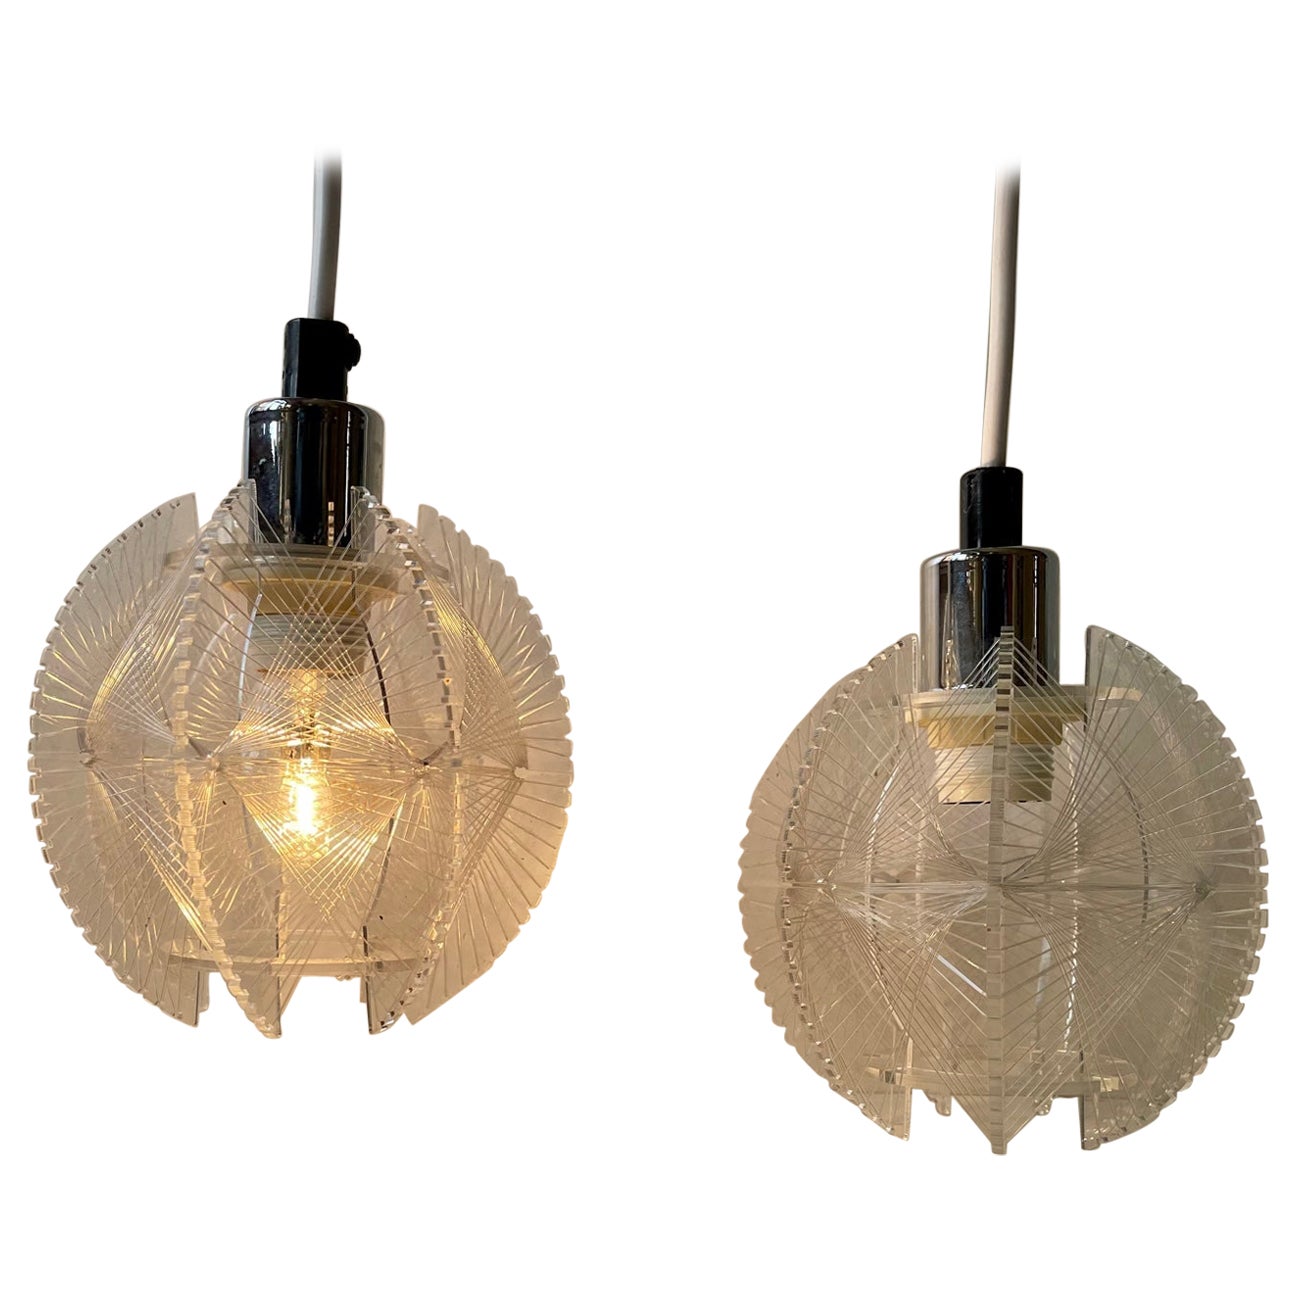 Modernist Lucite & String Ceiling Lamps by Paul Secon for Sompex, Germany, 1970s For Sale